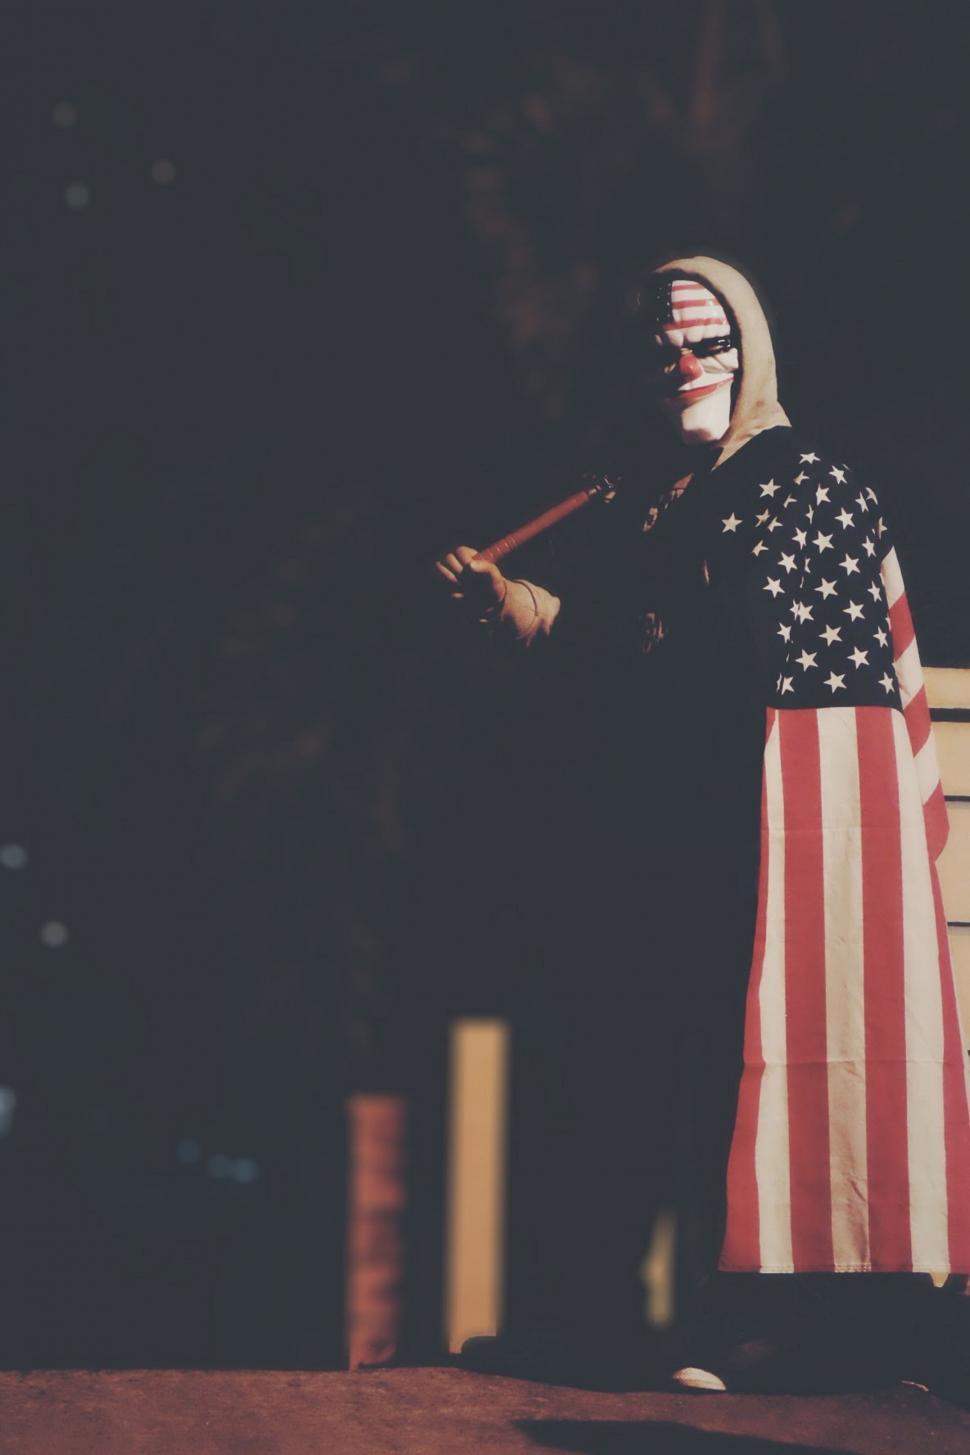 Free Image of Man in Mask Holding American Flag 